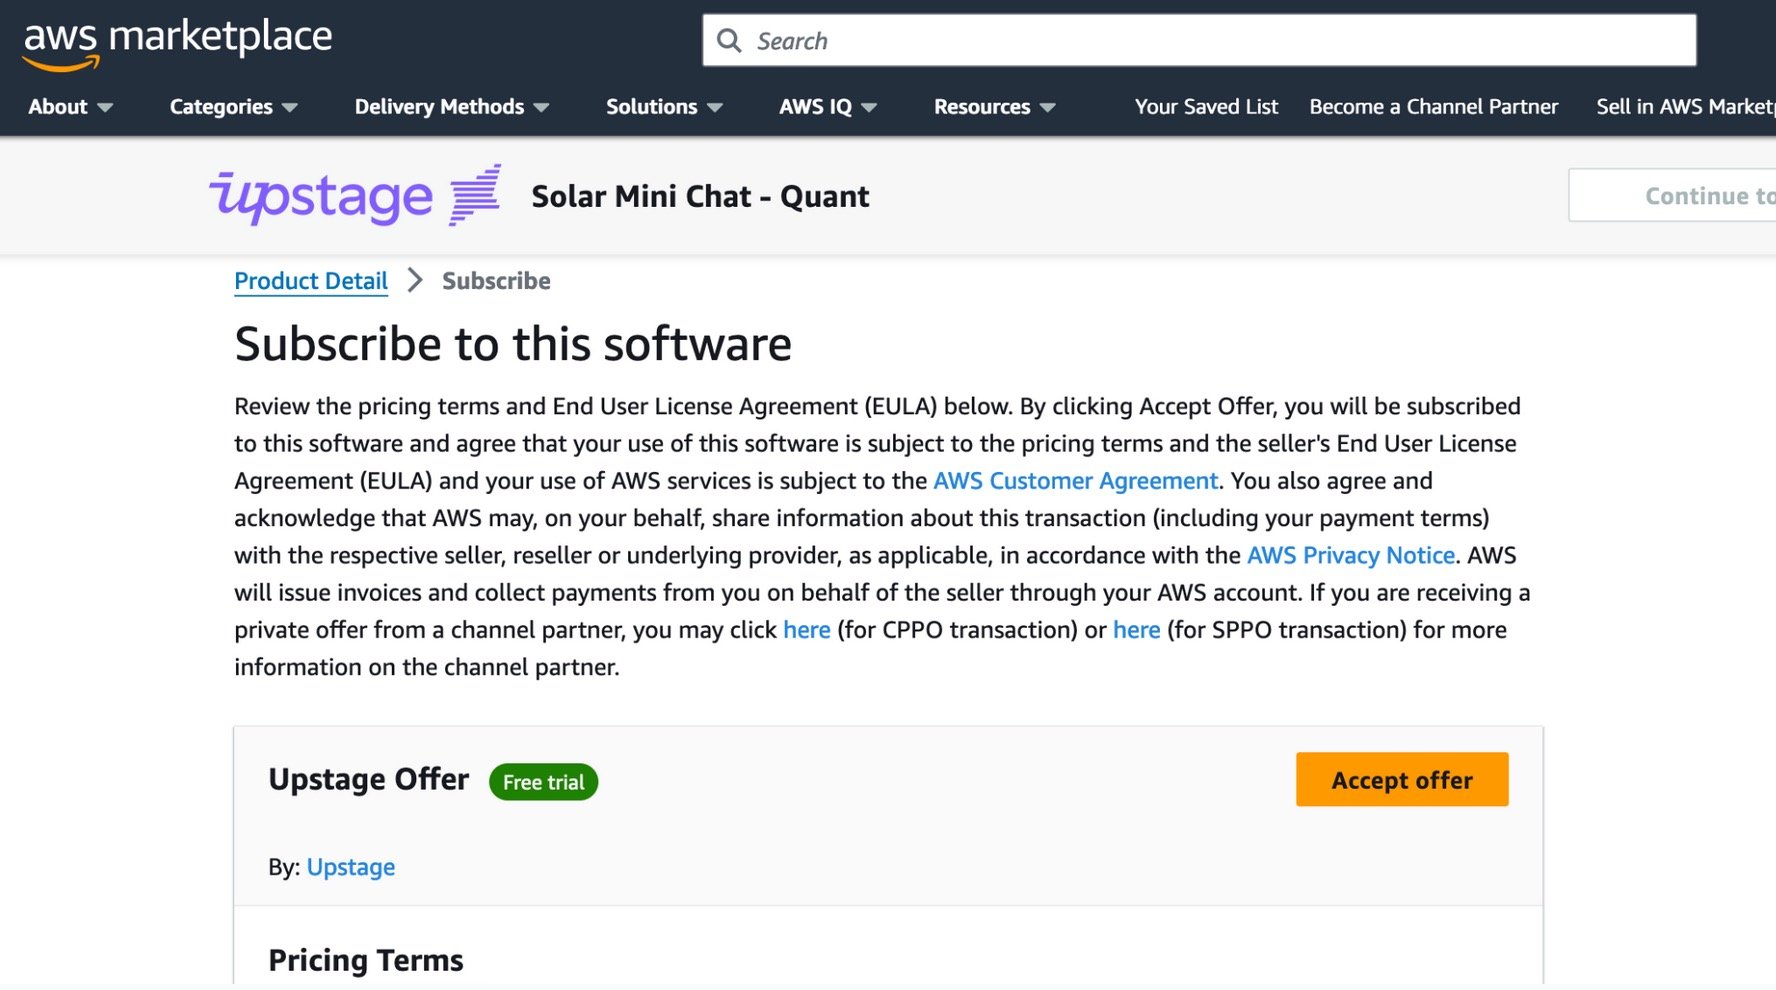 Figure: Accept Solar model offer in AWS Marketplace